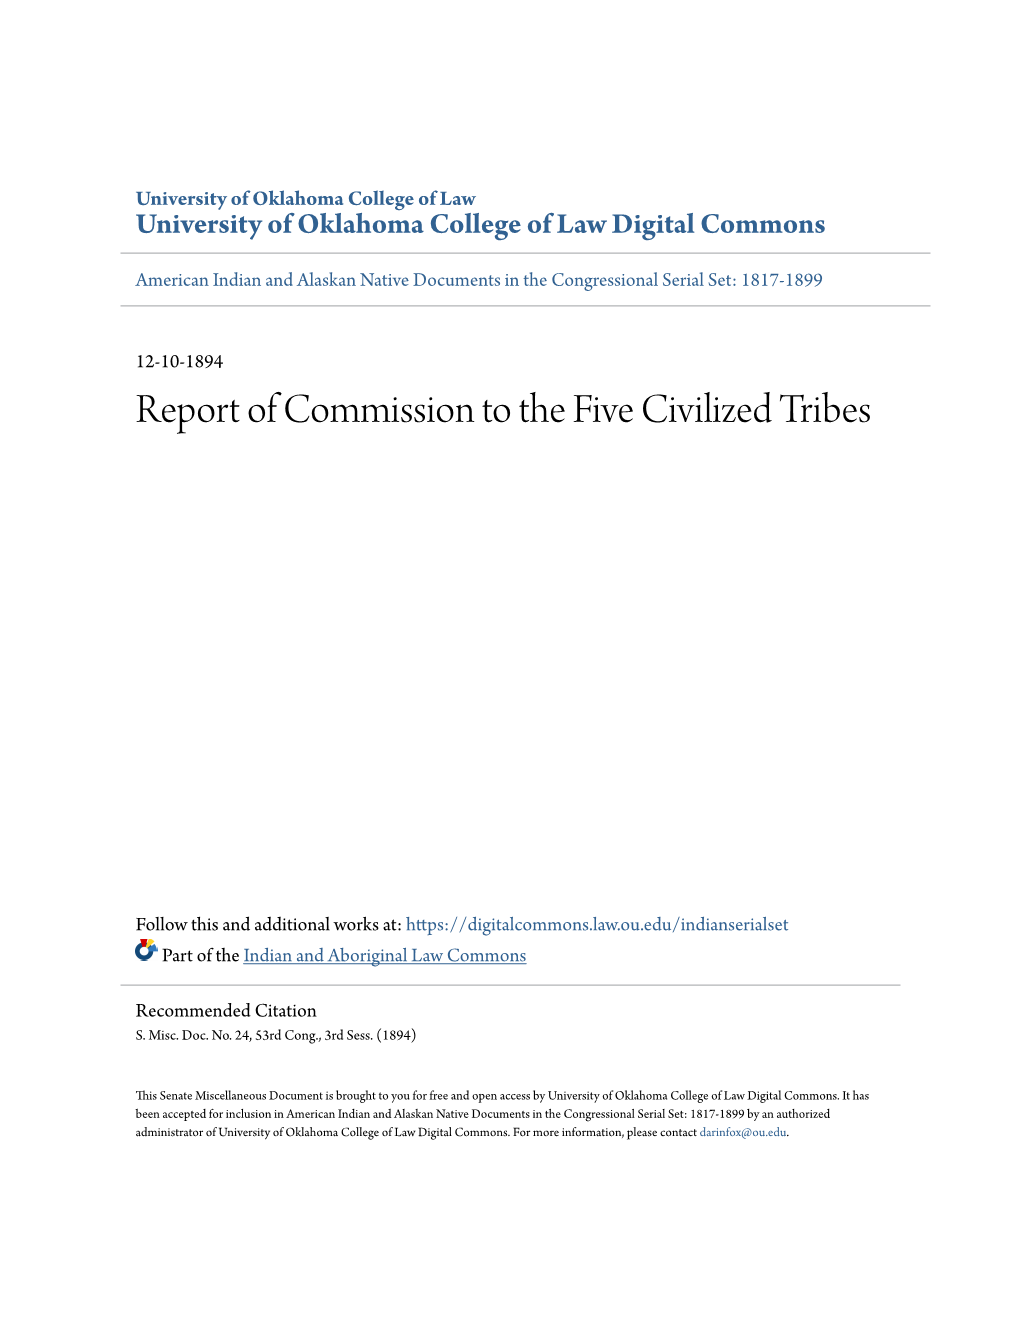 Report of Commission to the Five Civilized Tribes